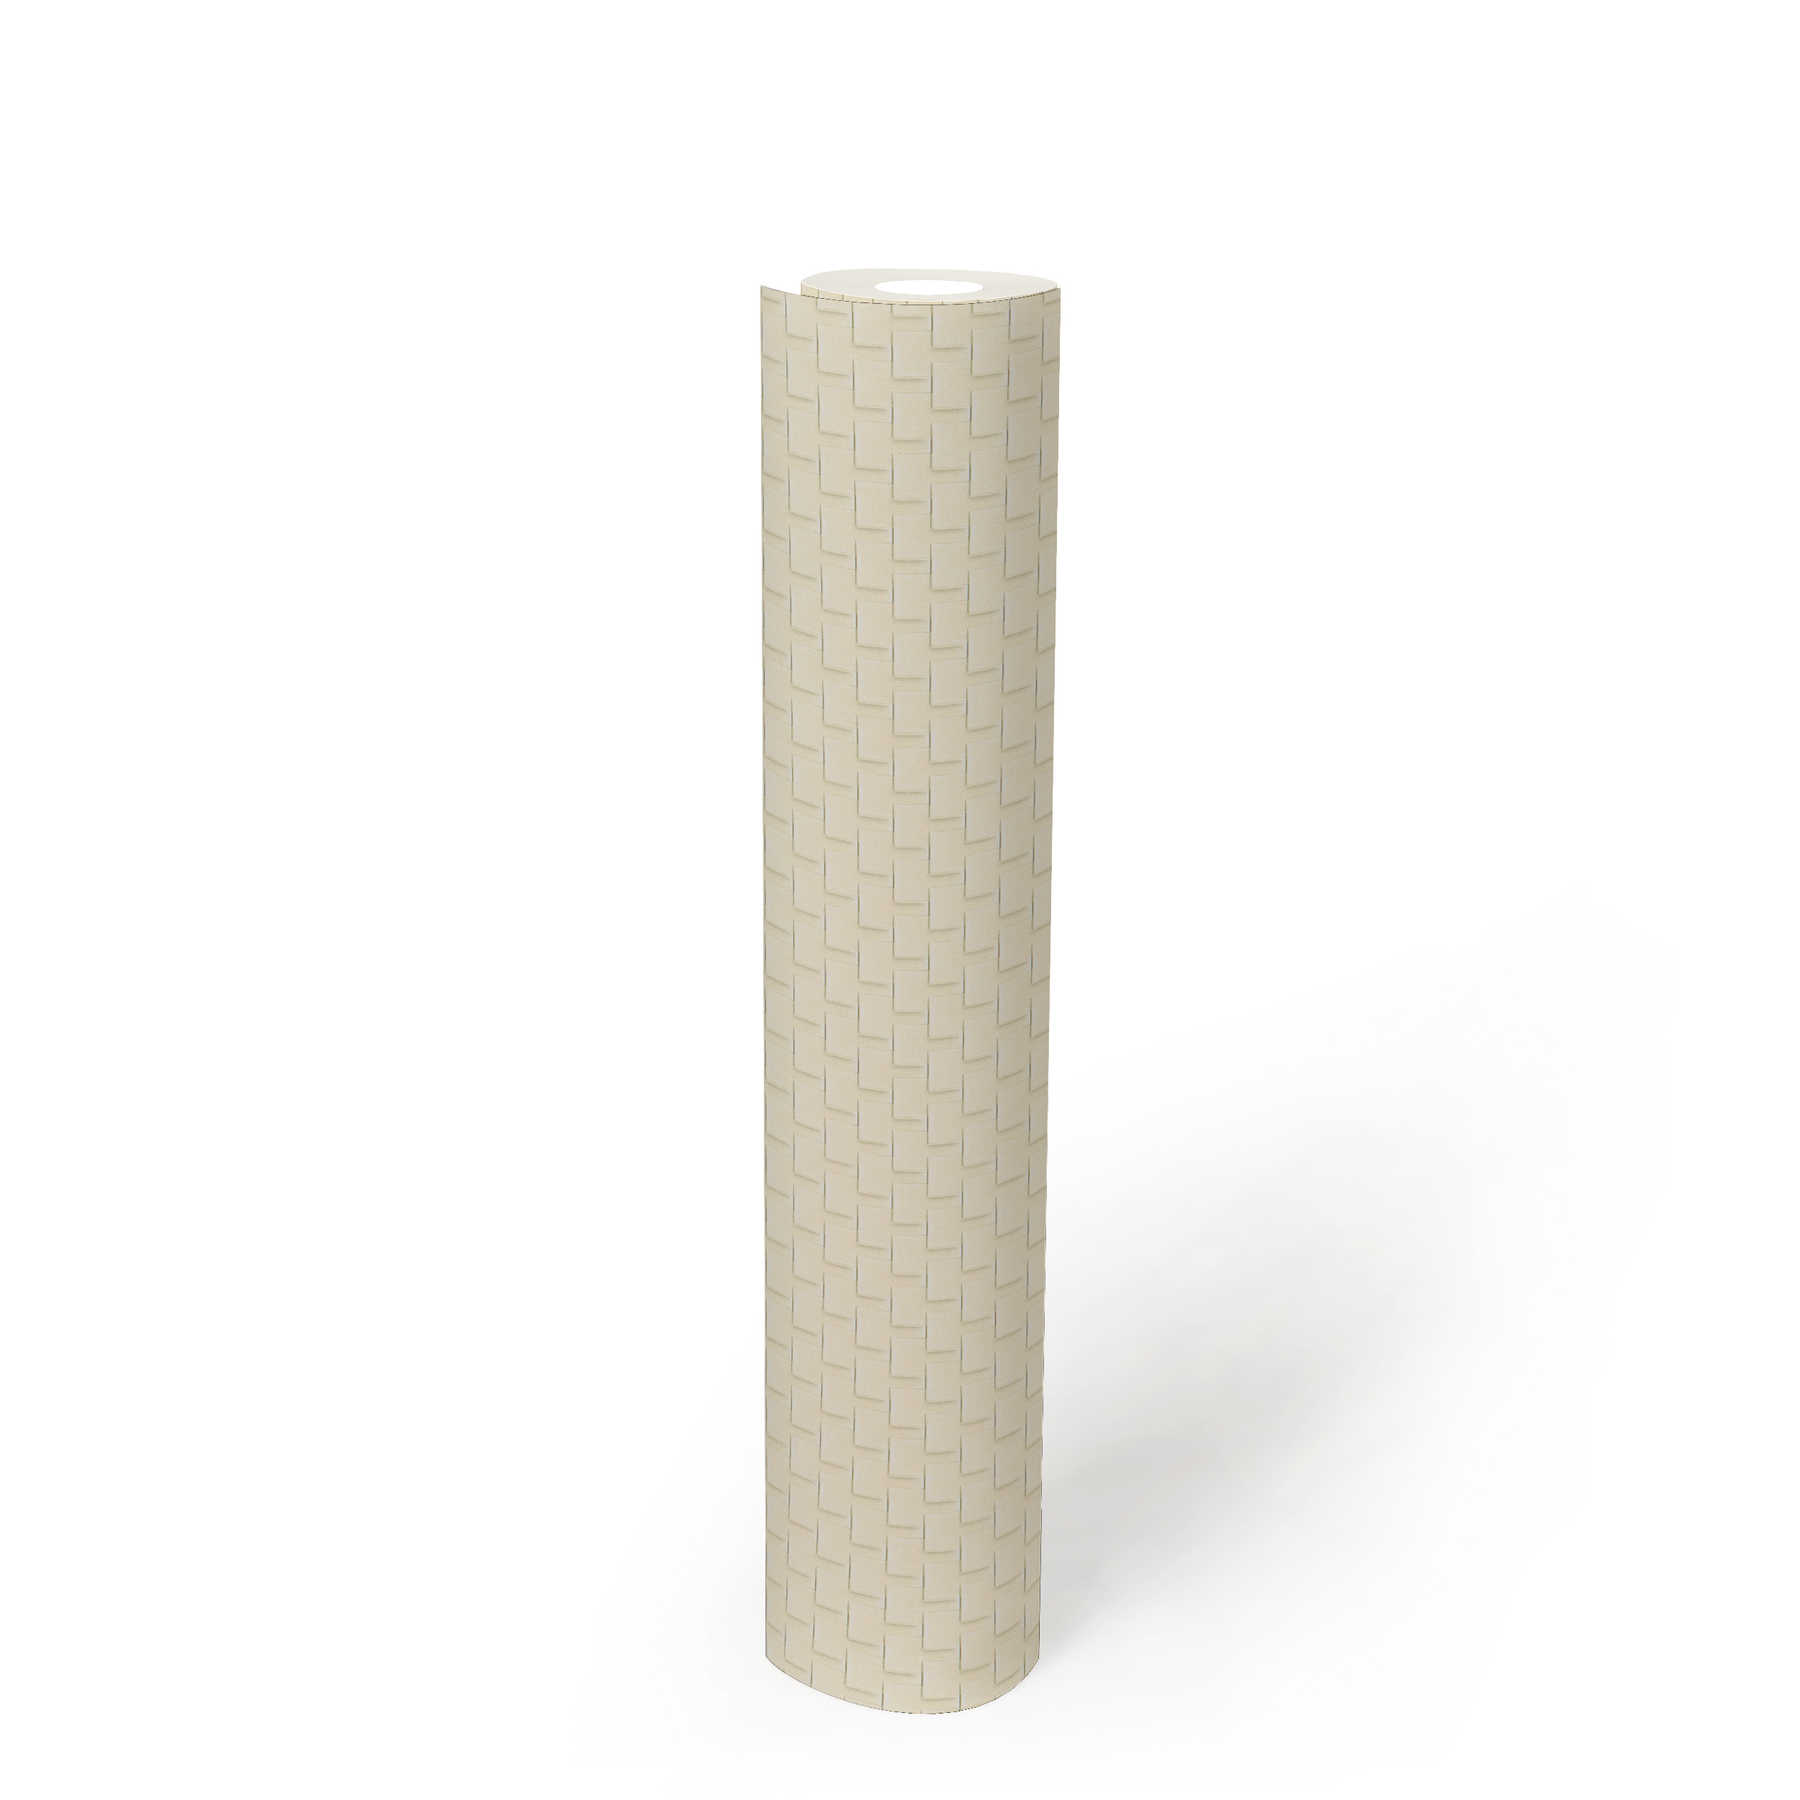             Patterned wallpaper with facet design and 3D effect - beige, cream, silver
        